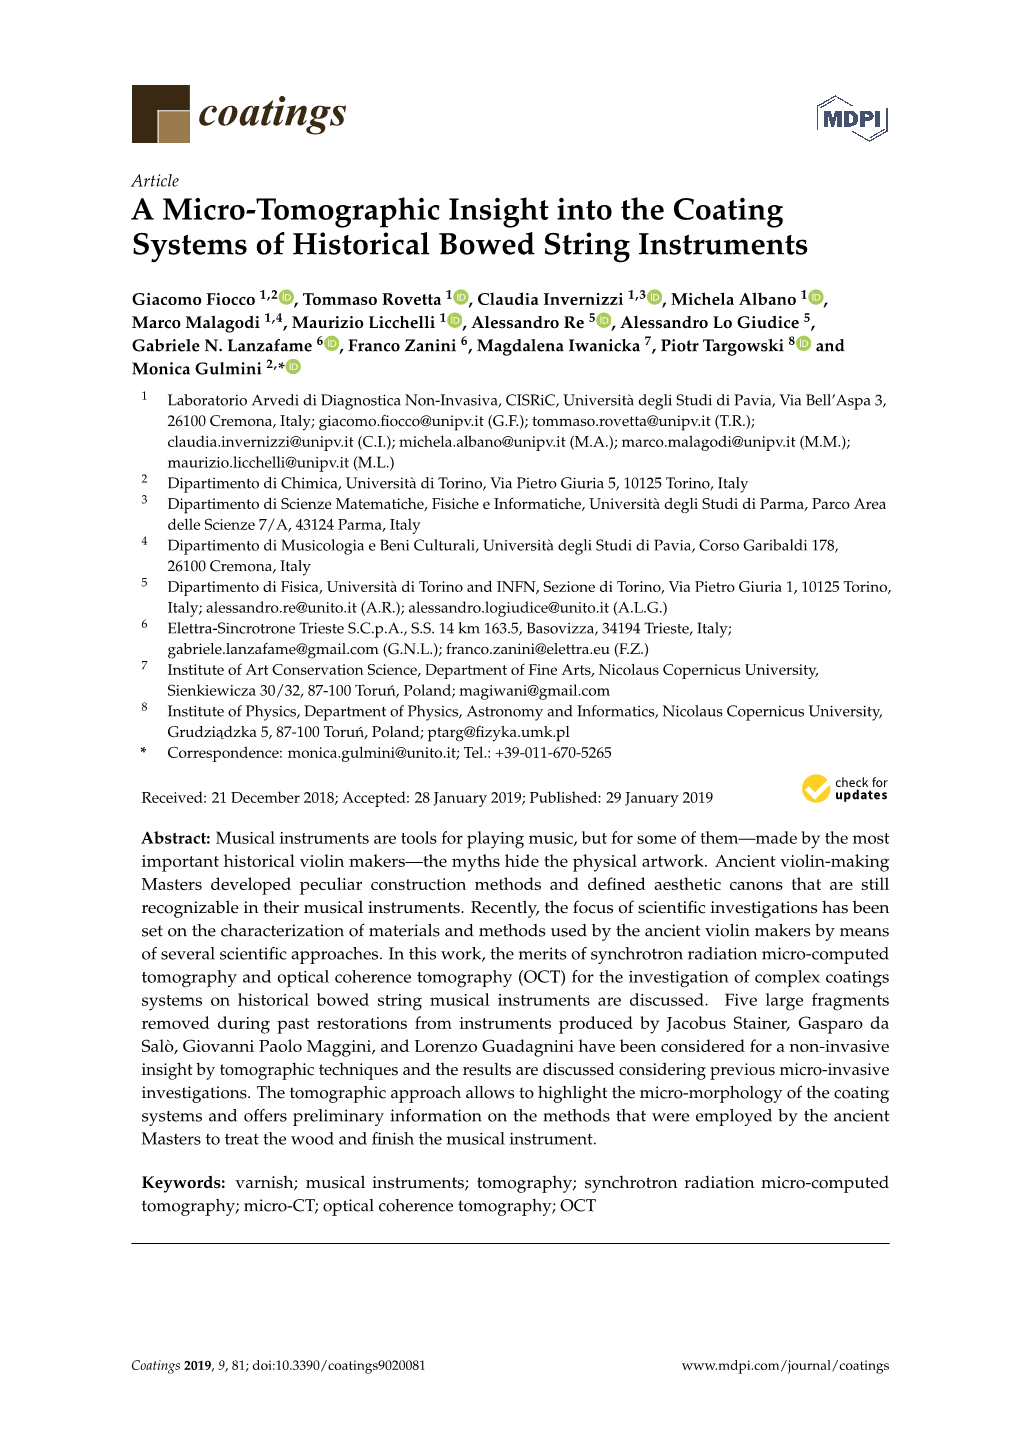 A Micro-Tomographic Insight Into the Coating Systems of Historical Bowed String Instruments